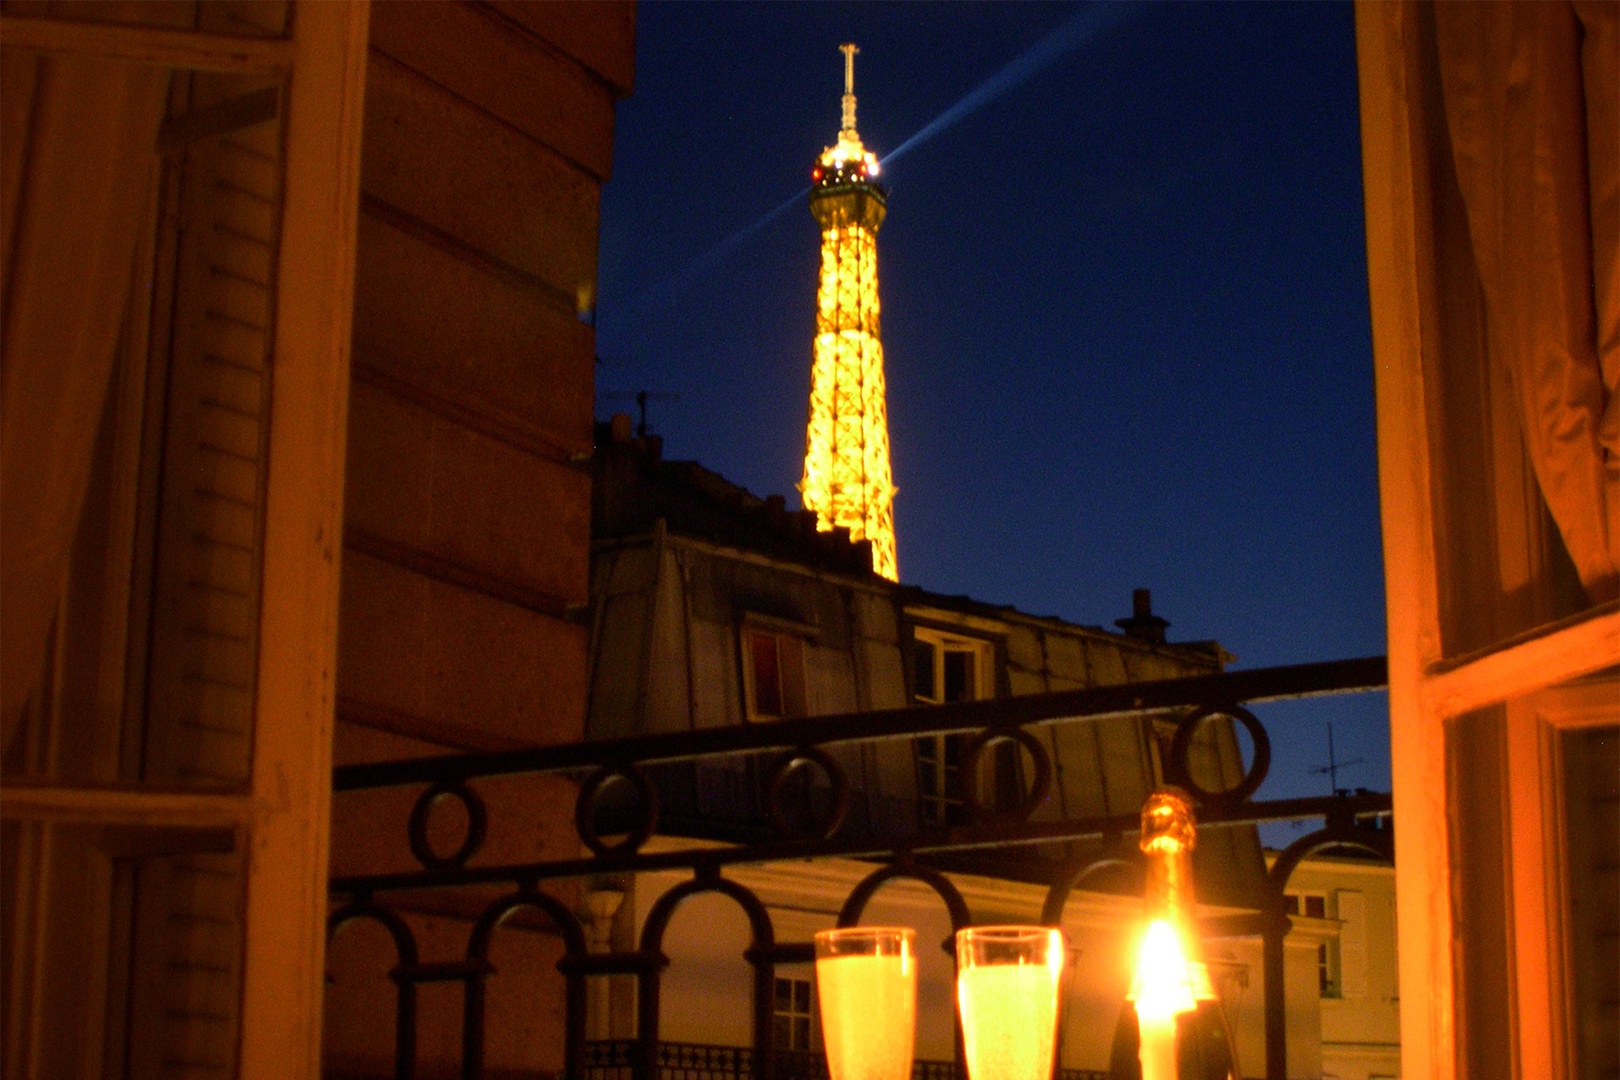 Watch the lights sparkle on the Eiffel Tower right from the apartment.